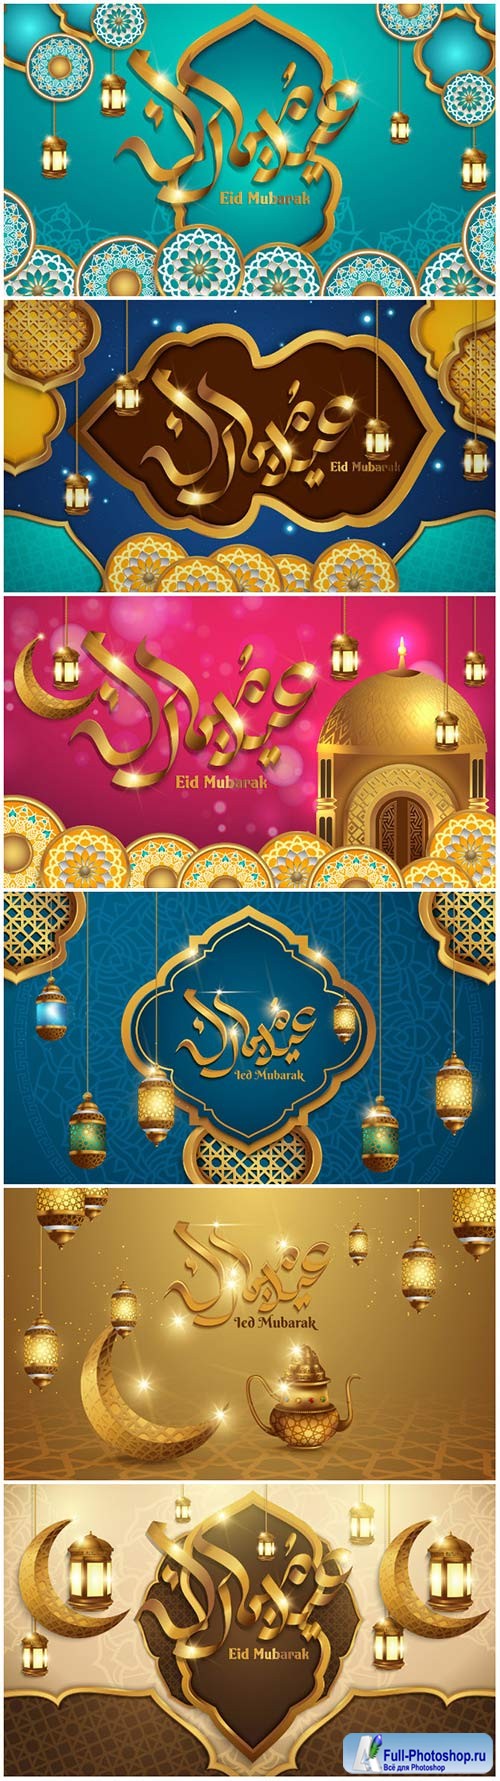 Ramadan Kareem vector calligraphy design with decorative floral pattern, mosque silhouette, crescent and glittering islamic background # 57